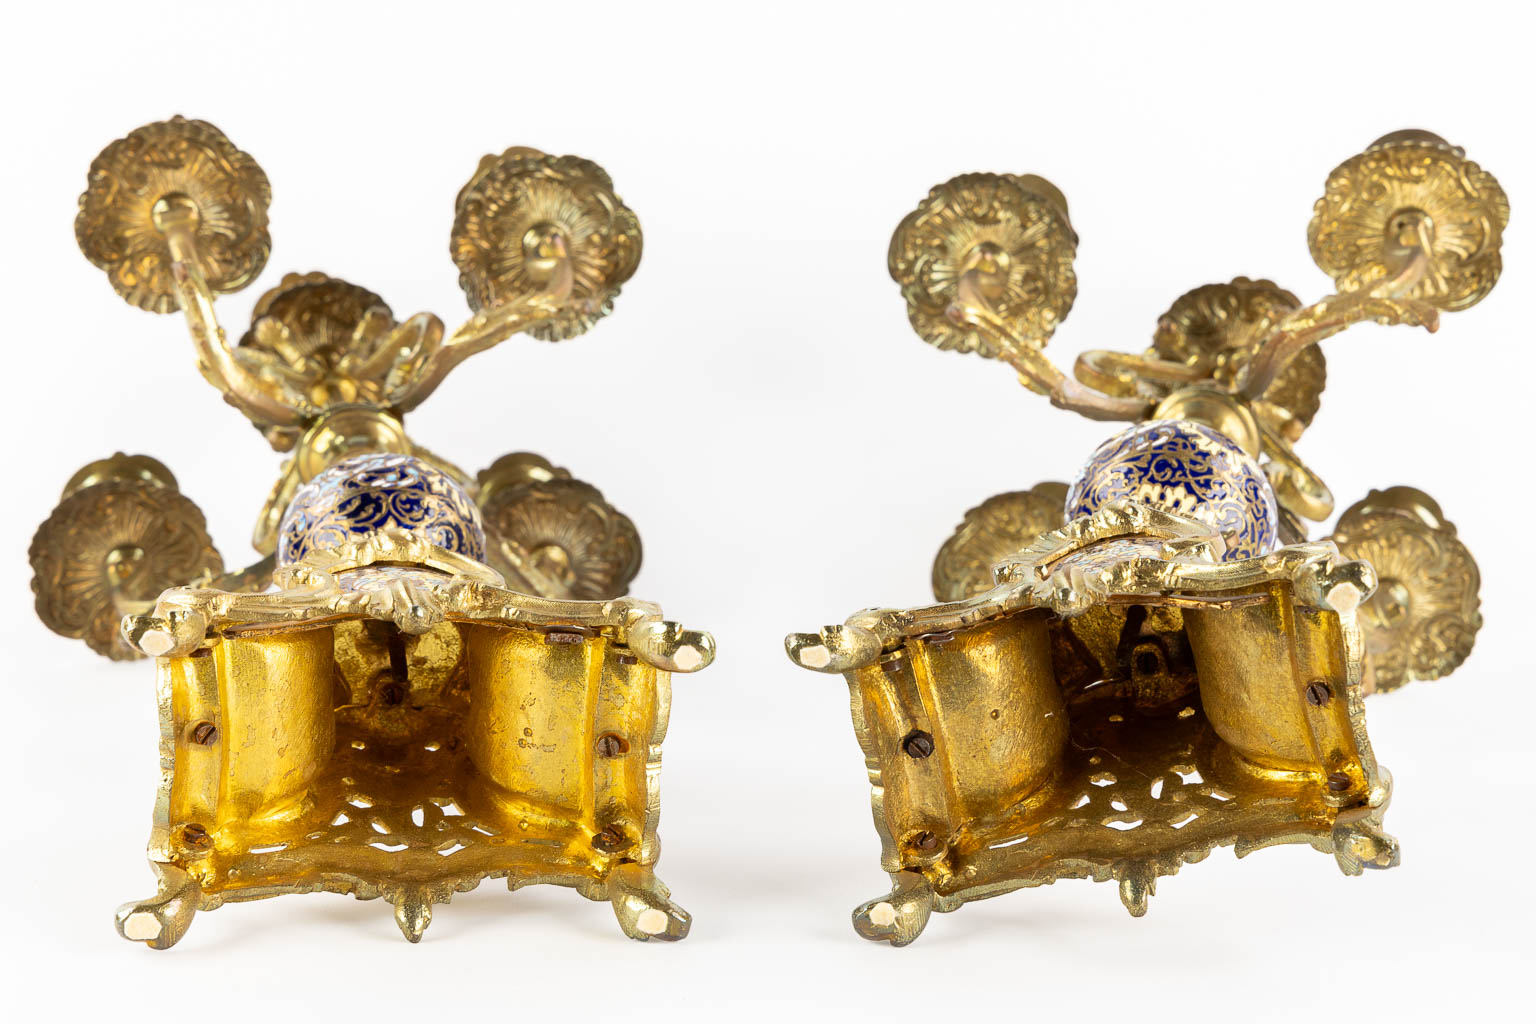 Two pairs of candelabra, bronze and cloisonné, Empire and Louis XVI style. (H:49 x D:26 cm)